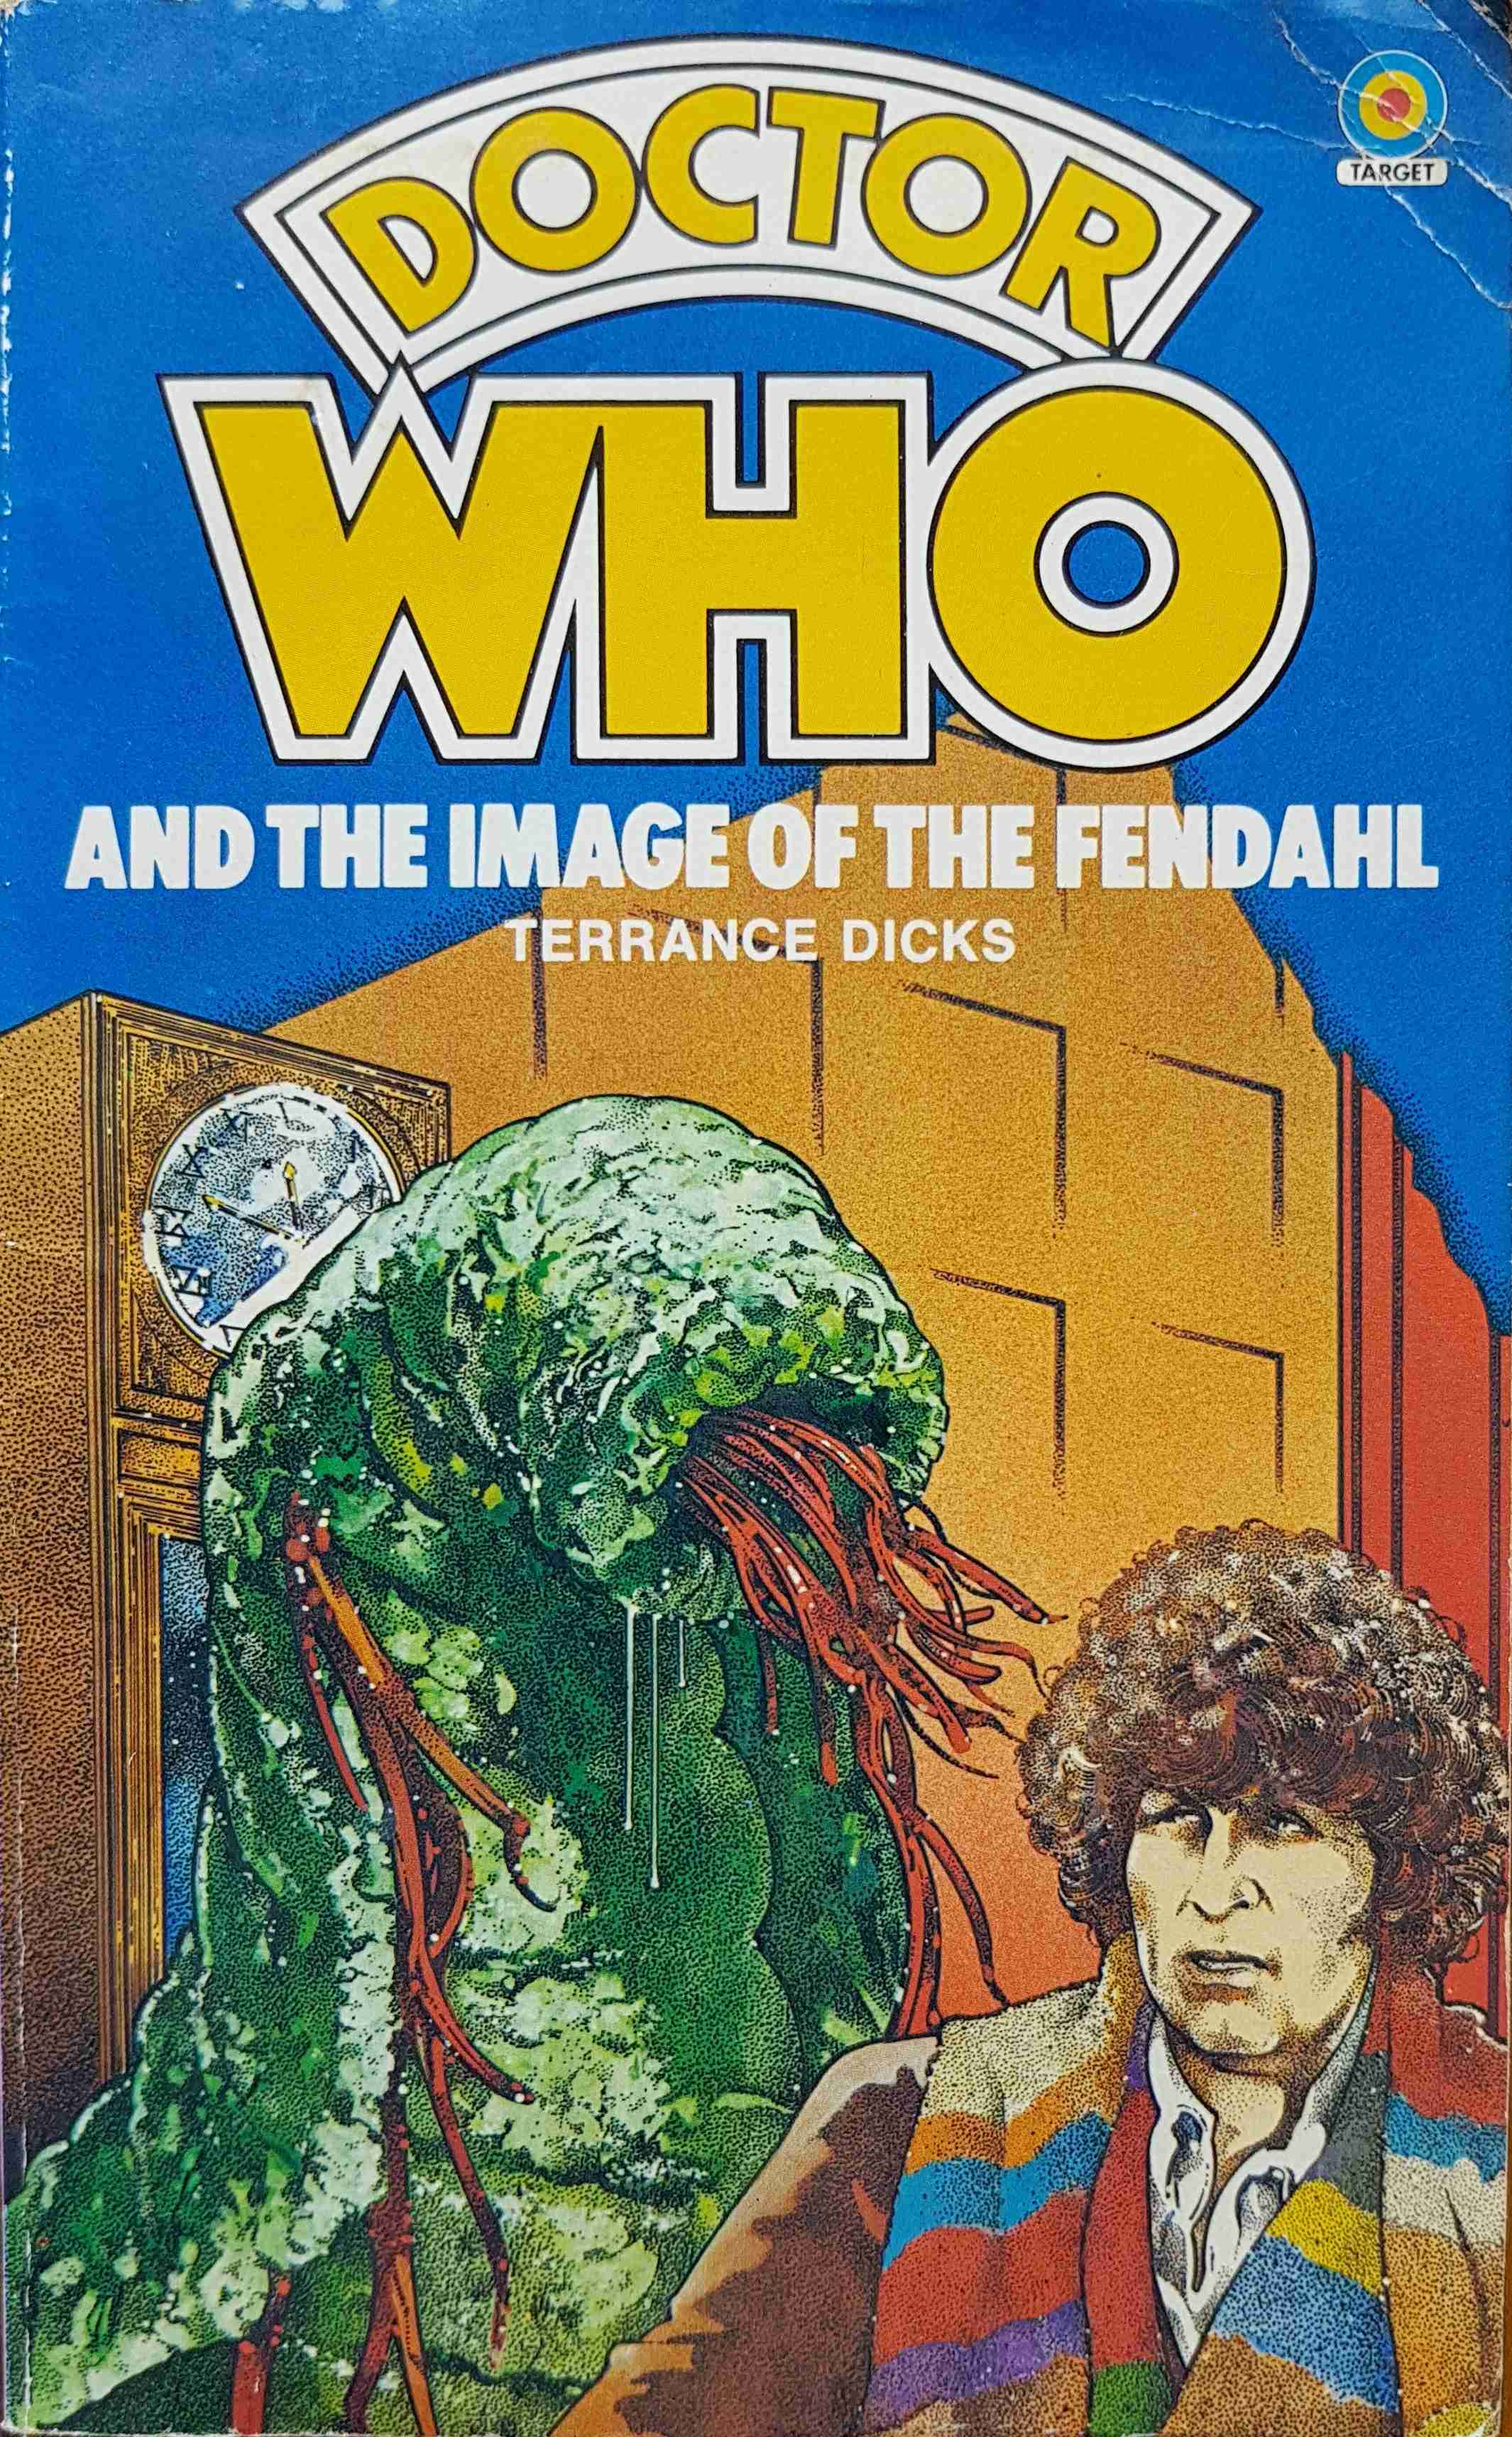 Picture of 0-426-20077-2 Doctor Who - Image of the Fendahl by artist Terrance Dicks from the BBC records and Tapes library